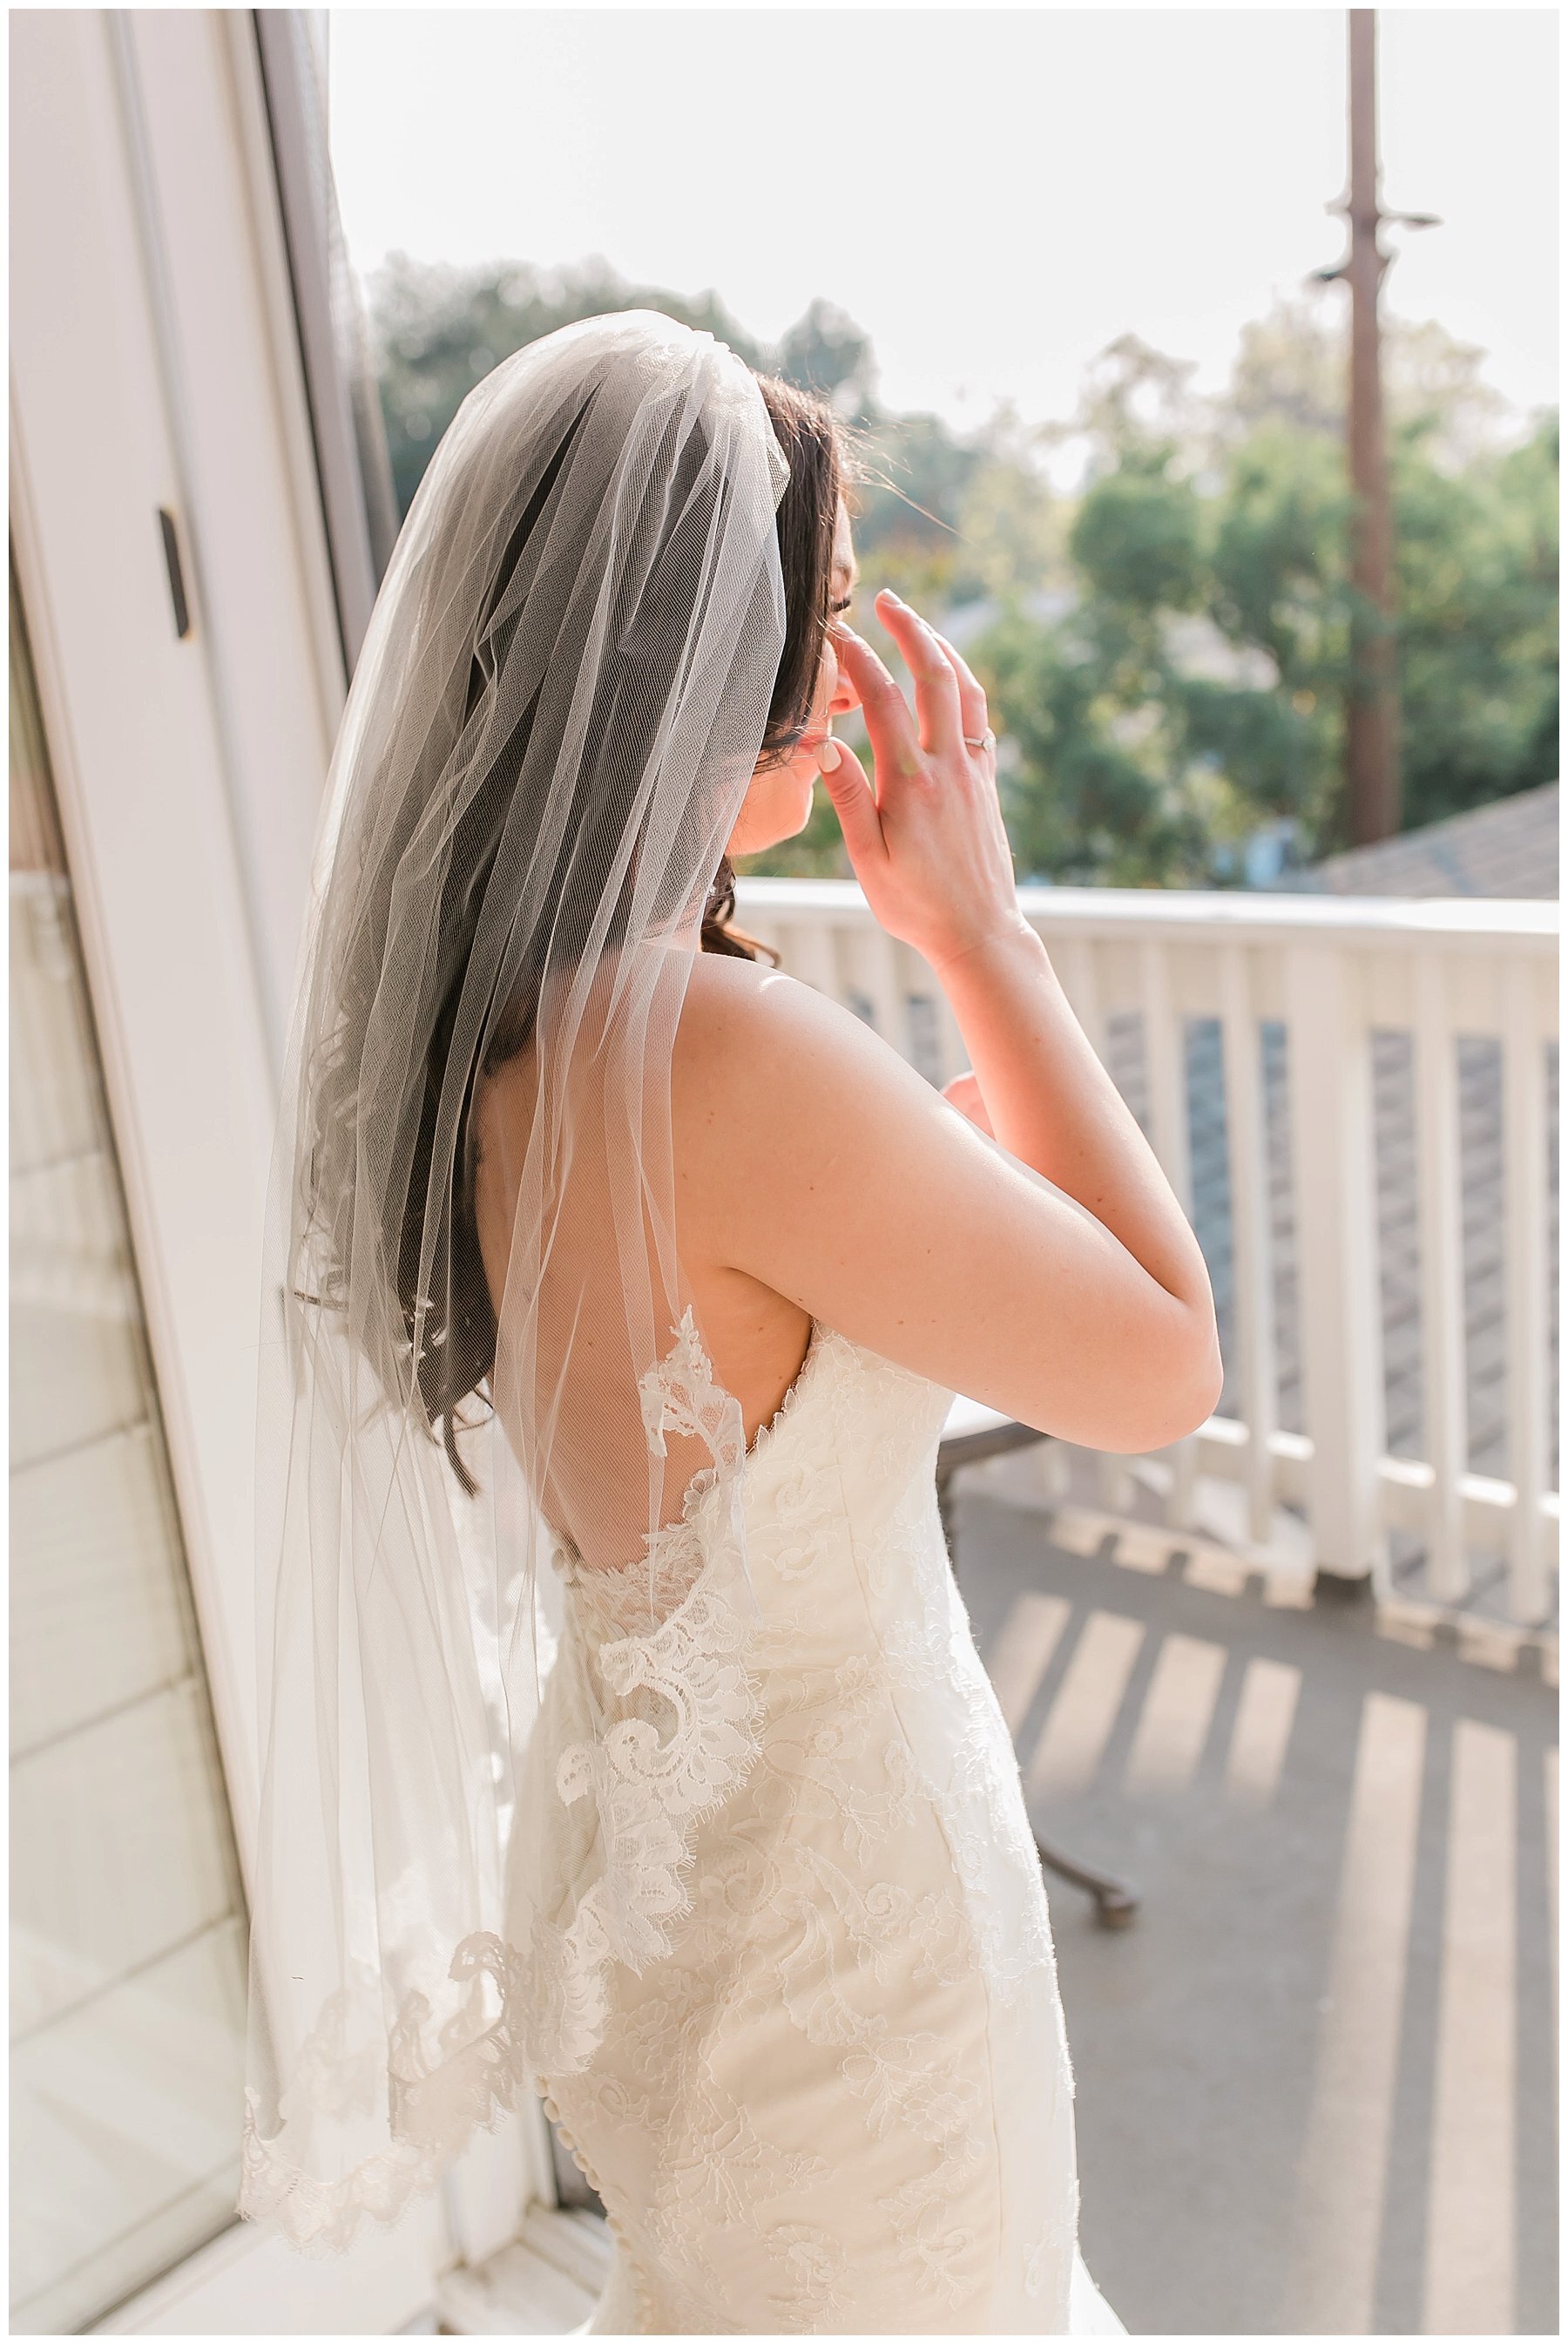  bride looks out over the balcony in her gown and veil 